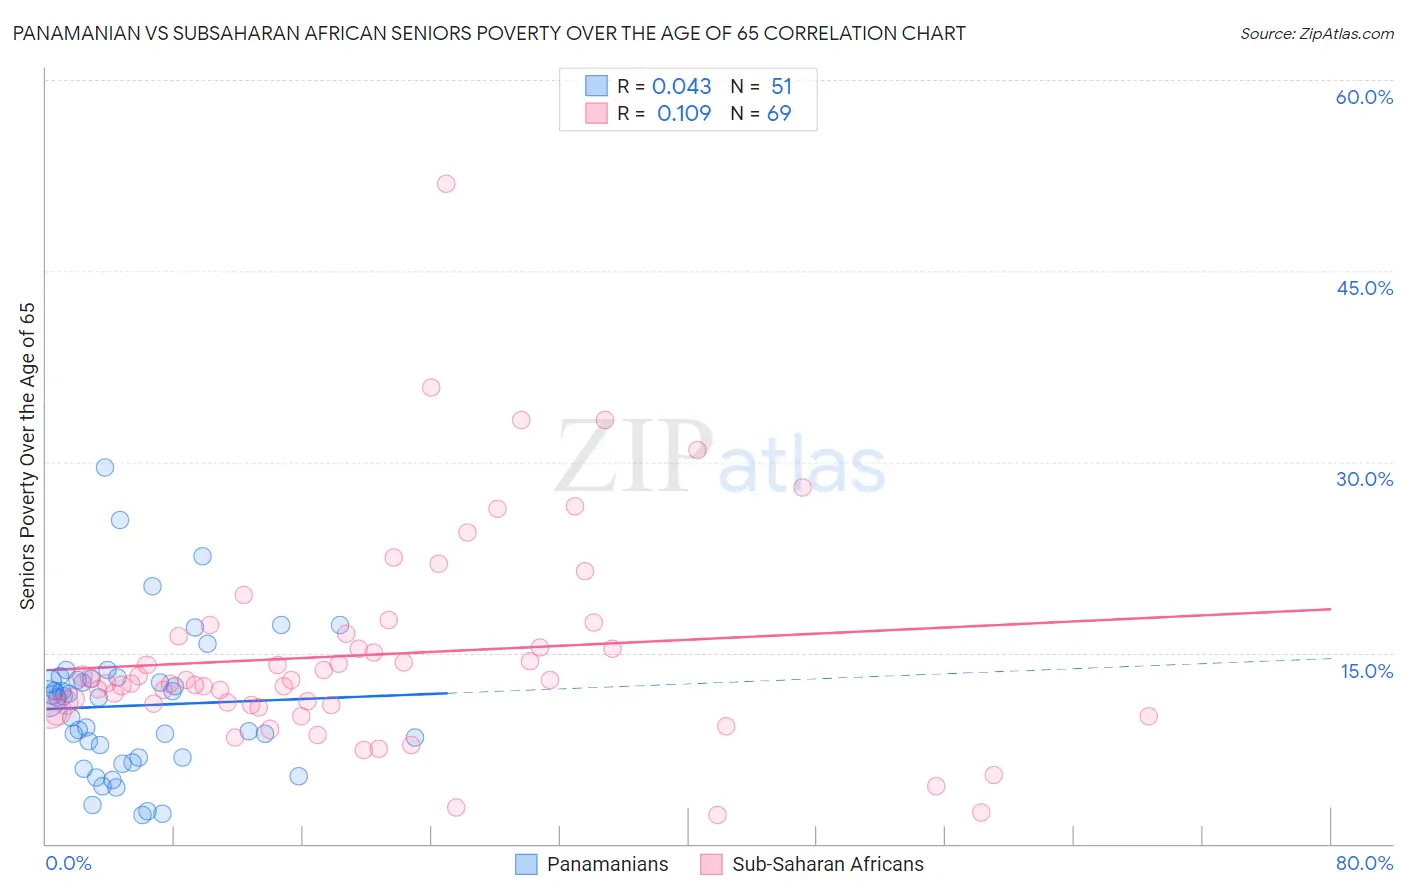 Panamanian vs Subsaharan African Seniors Poverty Over the Age of 65